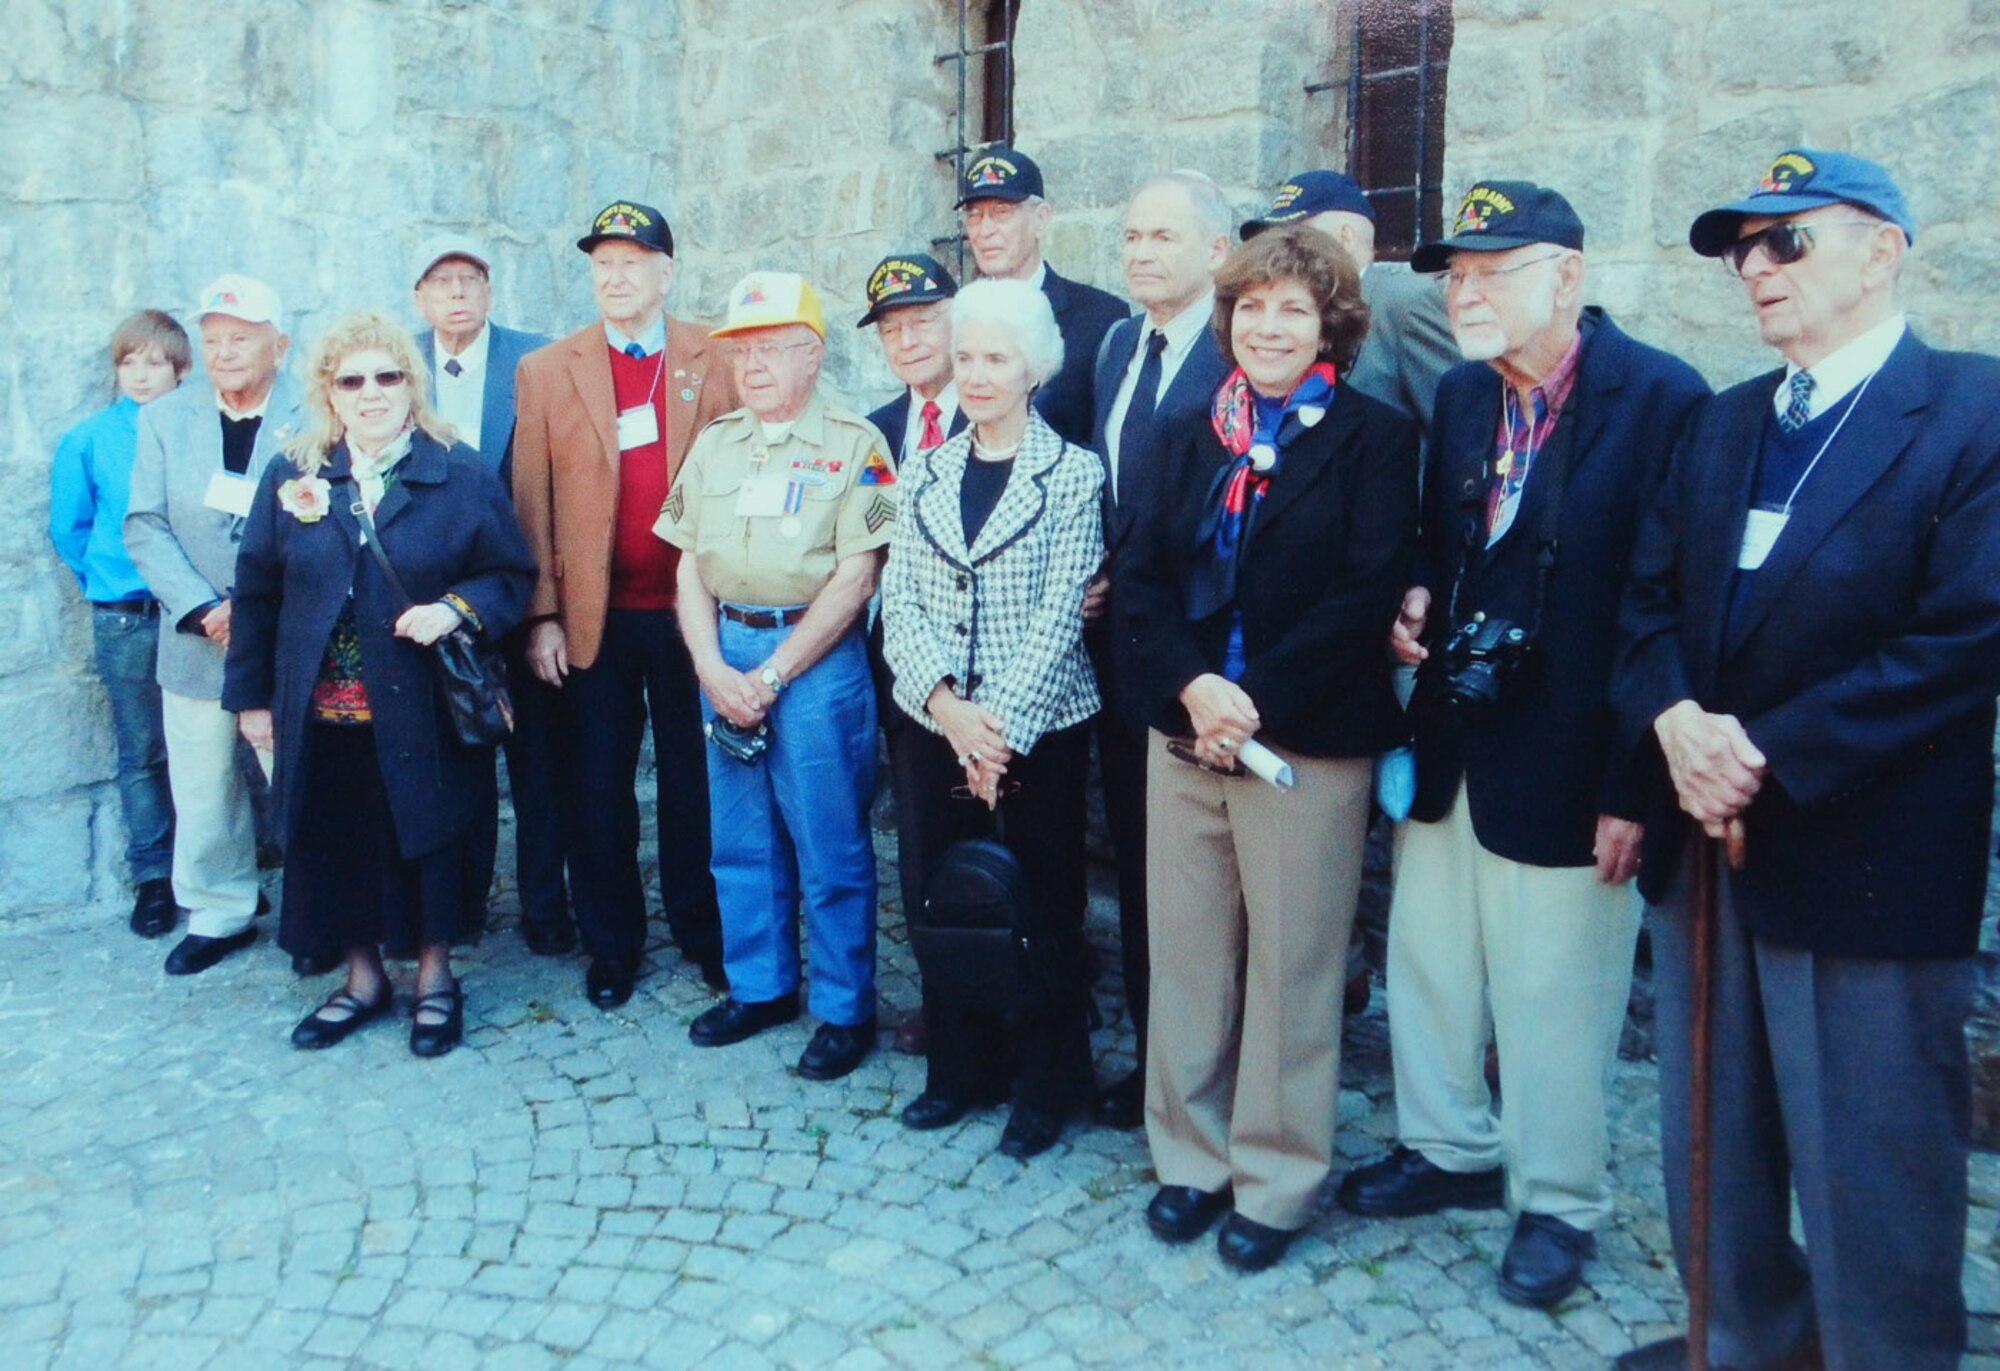 MAUTHAUSEN, Austria -- The surviving veterans of the 11th Armoured Division -- the U.S. Army unit which liberated the concentration camp in 1945 -- pose for a photo in 2010 with Eva Clarke, Hannah Berger-Moran and Mark Olsky (all now 65), all three of whom were babies born on a coal truck on its way to a concentration camp in Mauthausen, Austria. They were all born just days before the 11th Armoured Division liberated the camp. (Courtesy photo)